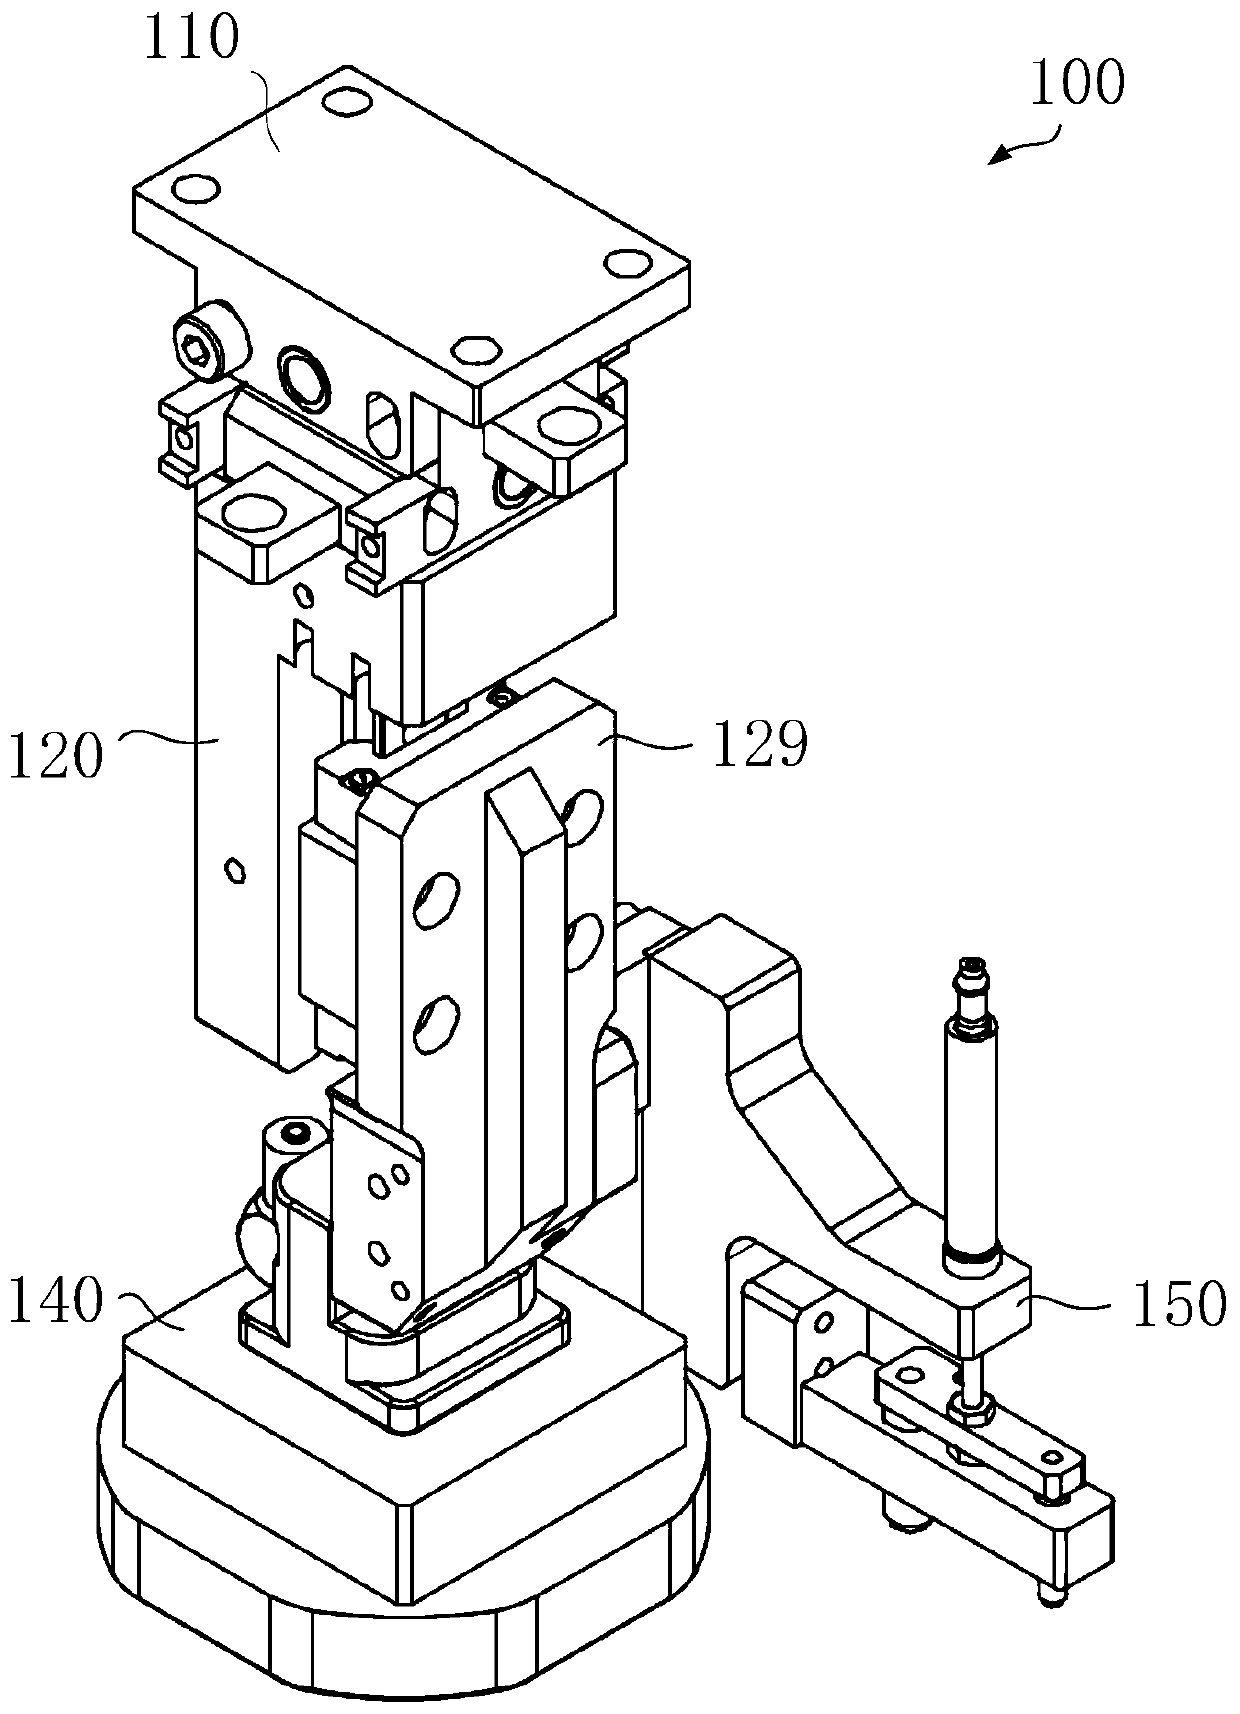 Pick-up mechanism for workpiece loading and unloading